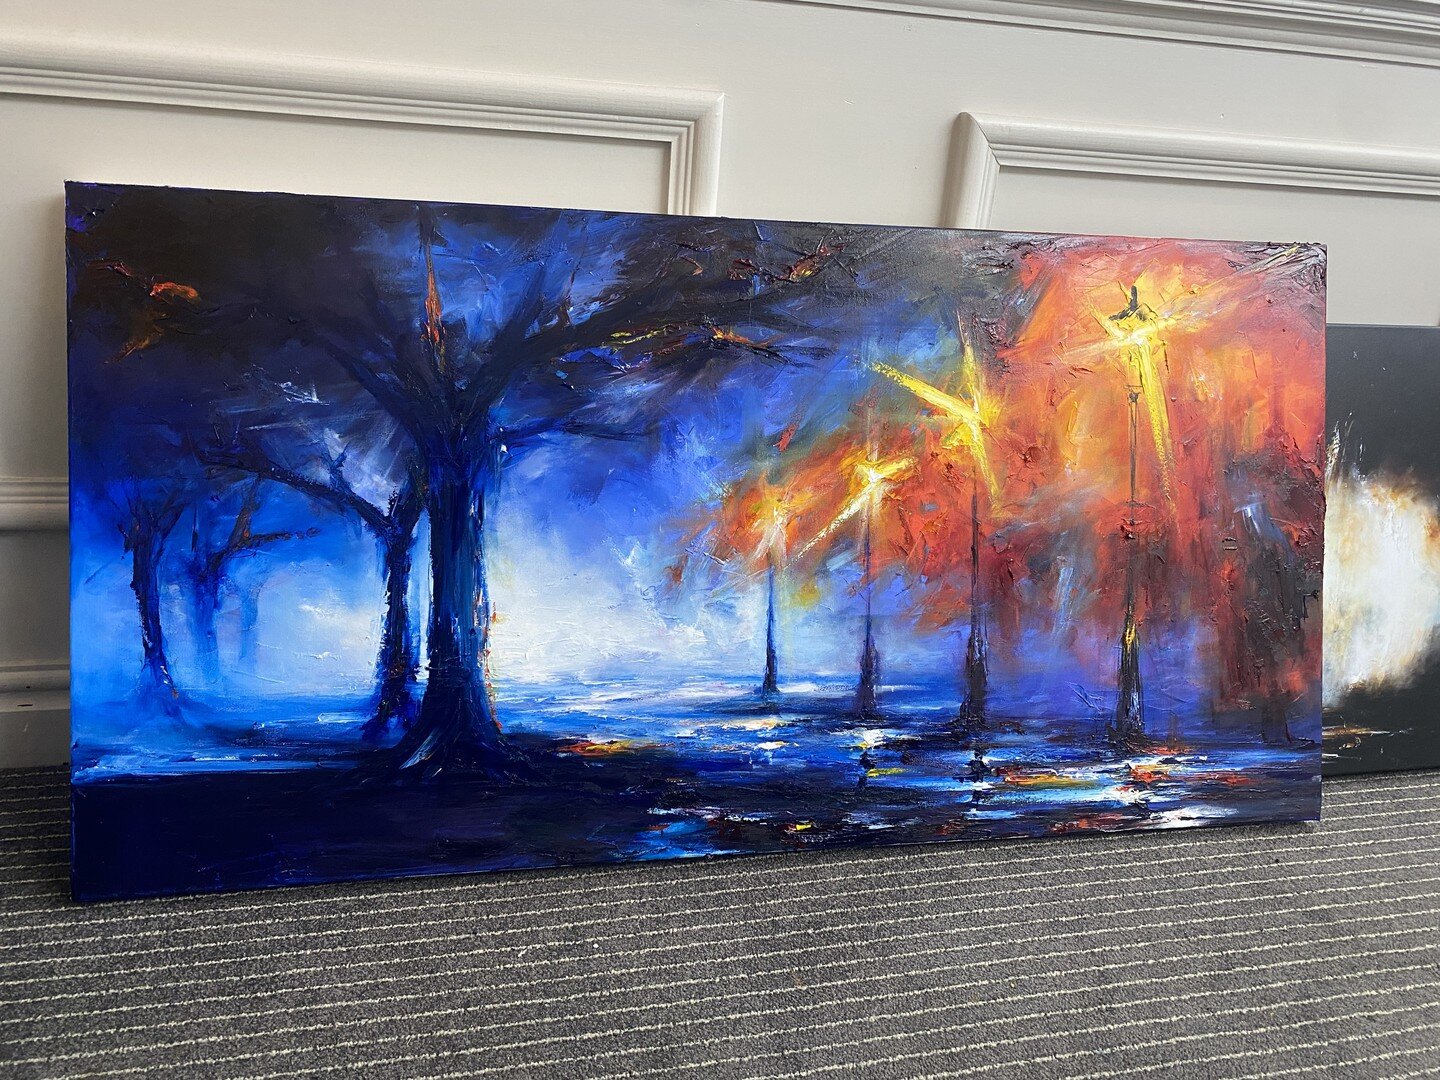 We are delighted to inform you that Ady has recently completed his latest painting, a captivating abstract representation of Pannet Park. While this piece serves as a preliminary &quot;study,&quot; Ady is brimming with excitement to showcase his new 